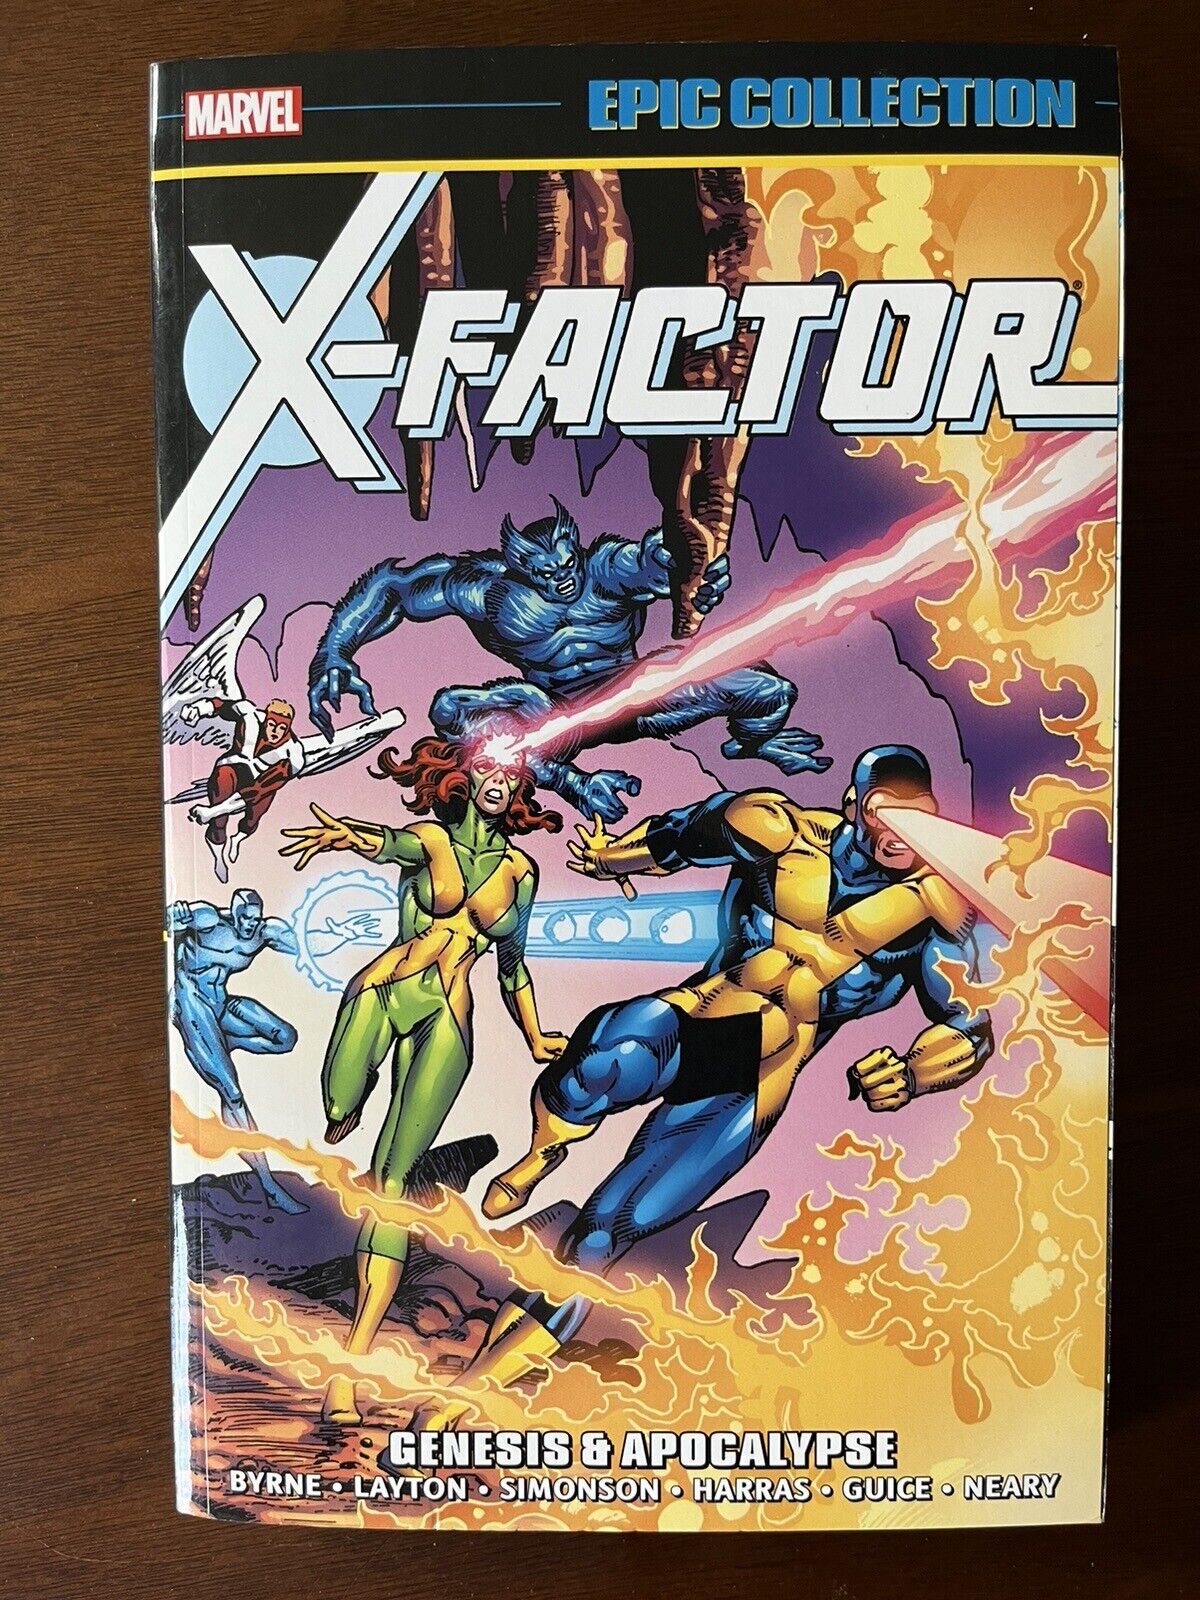 X-FACTOR EPIC COLLECTION: GENESIS & APOCALYPSE By Marvel Comics & Roger Stern